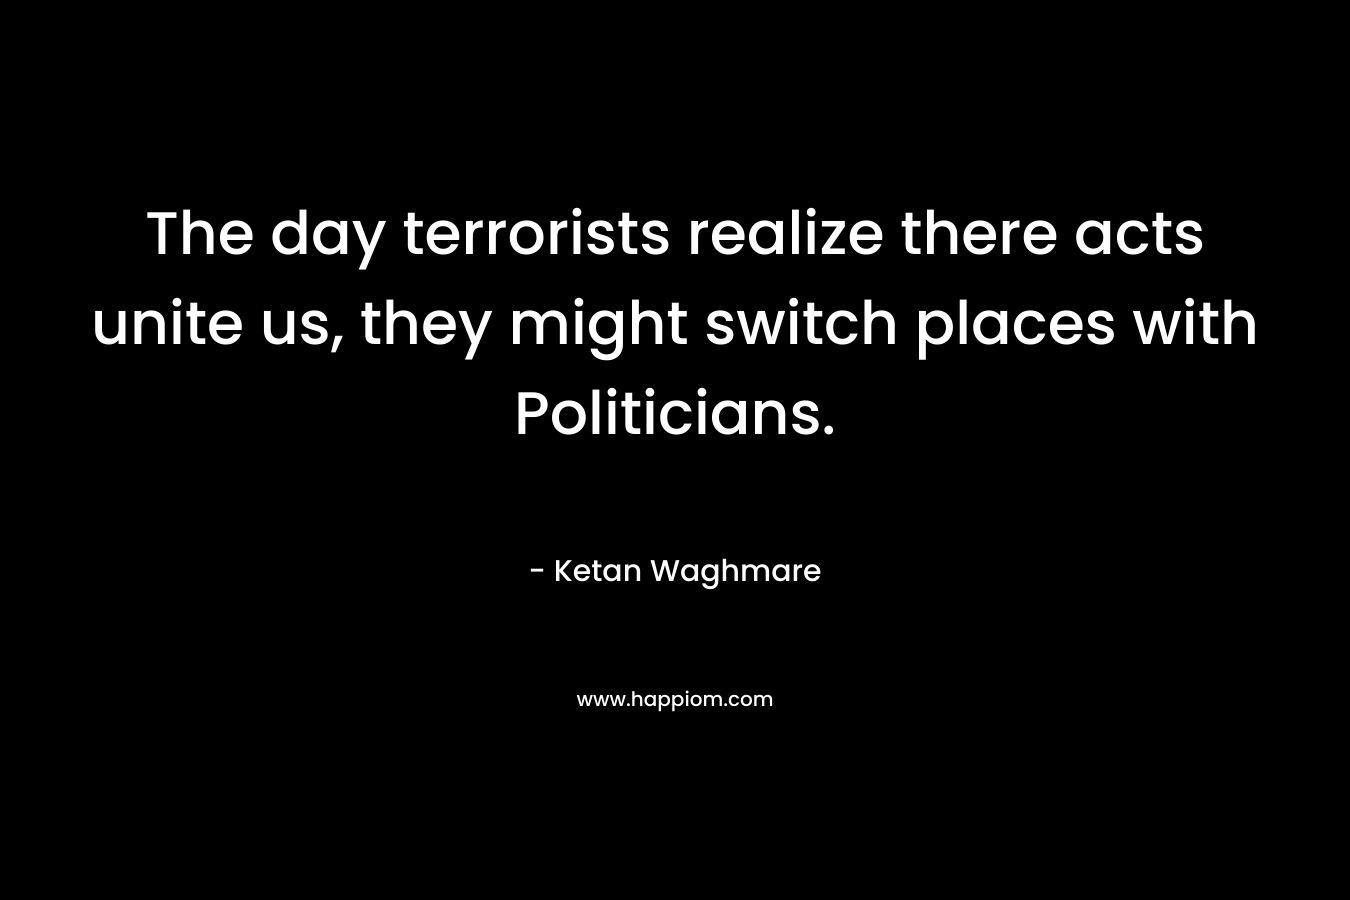 The day terrorists realize there acts unite us, they might switch places with Politicians. – Ketan Waghmare